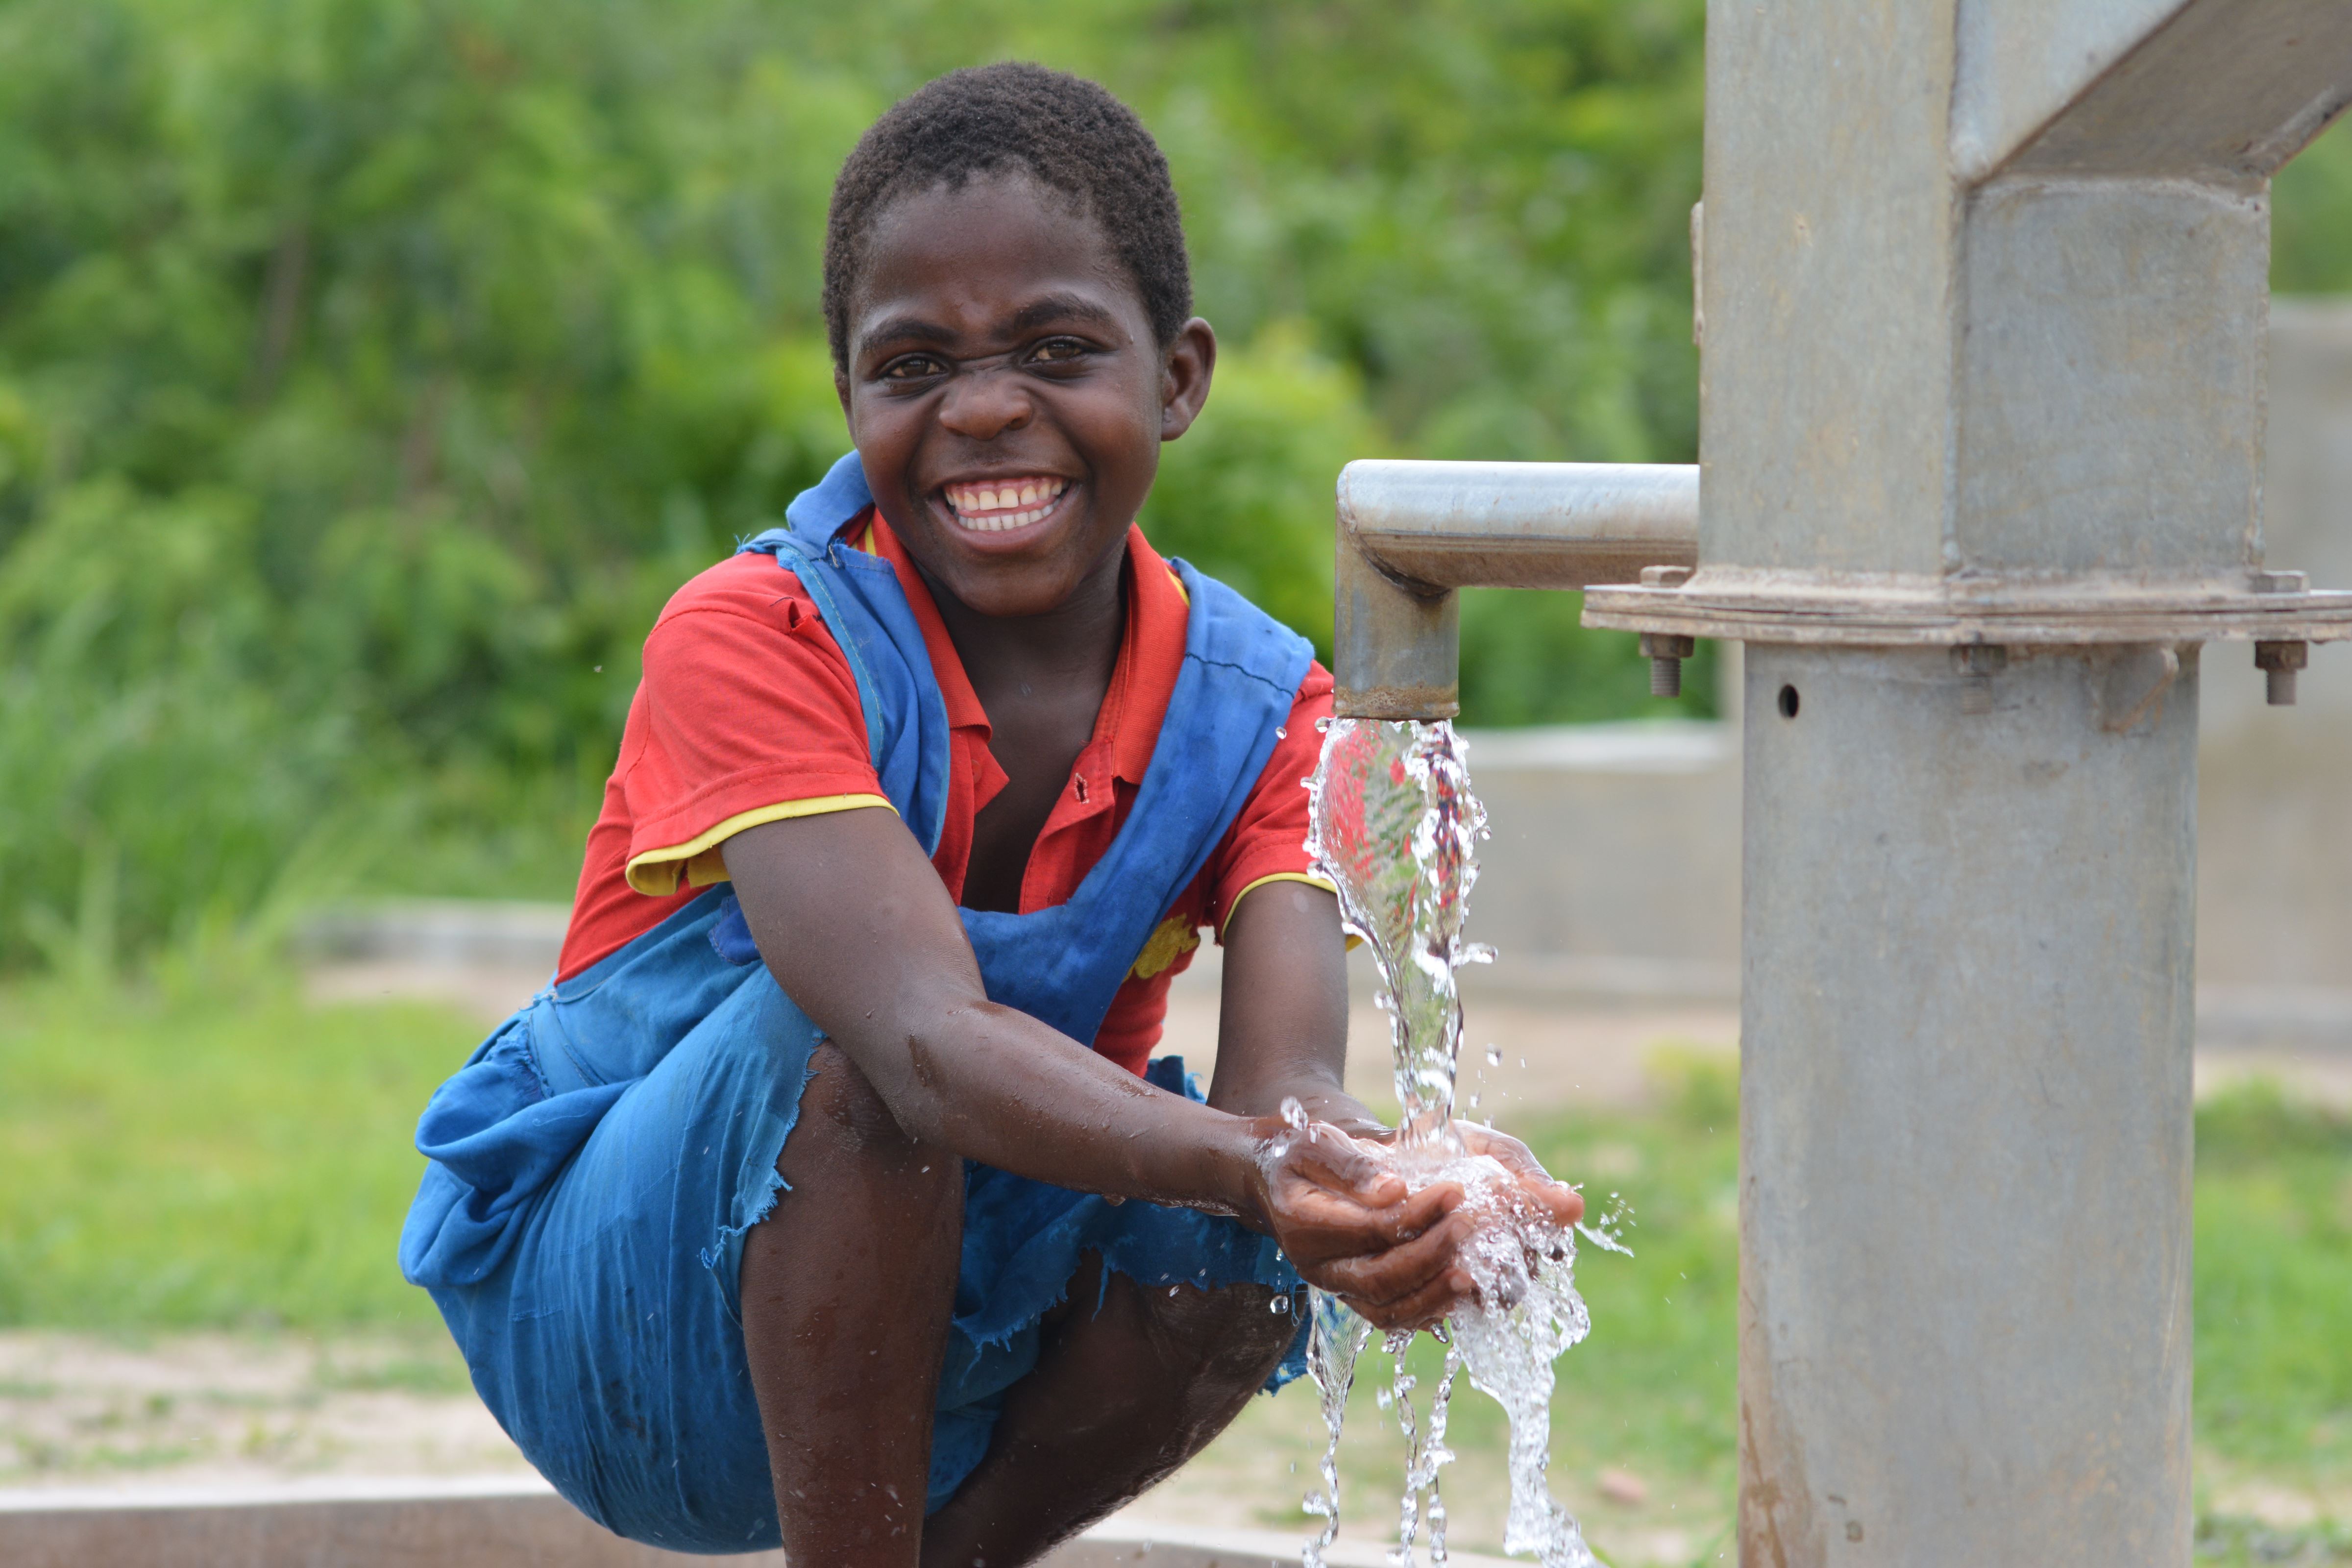 A child now has access to safe and clean drinking water